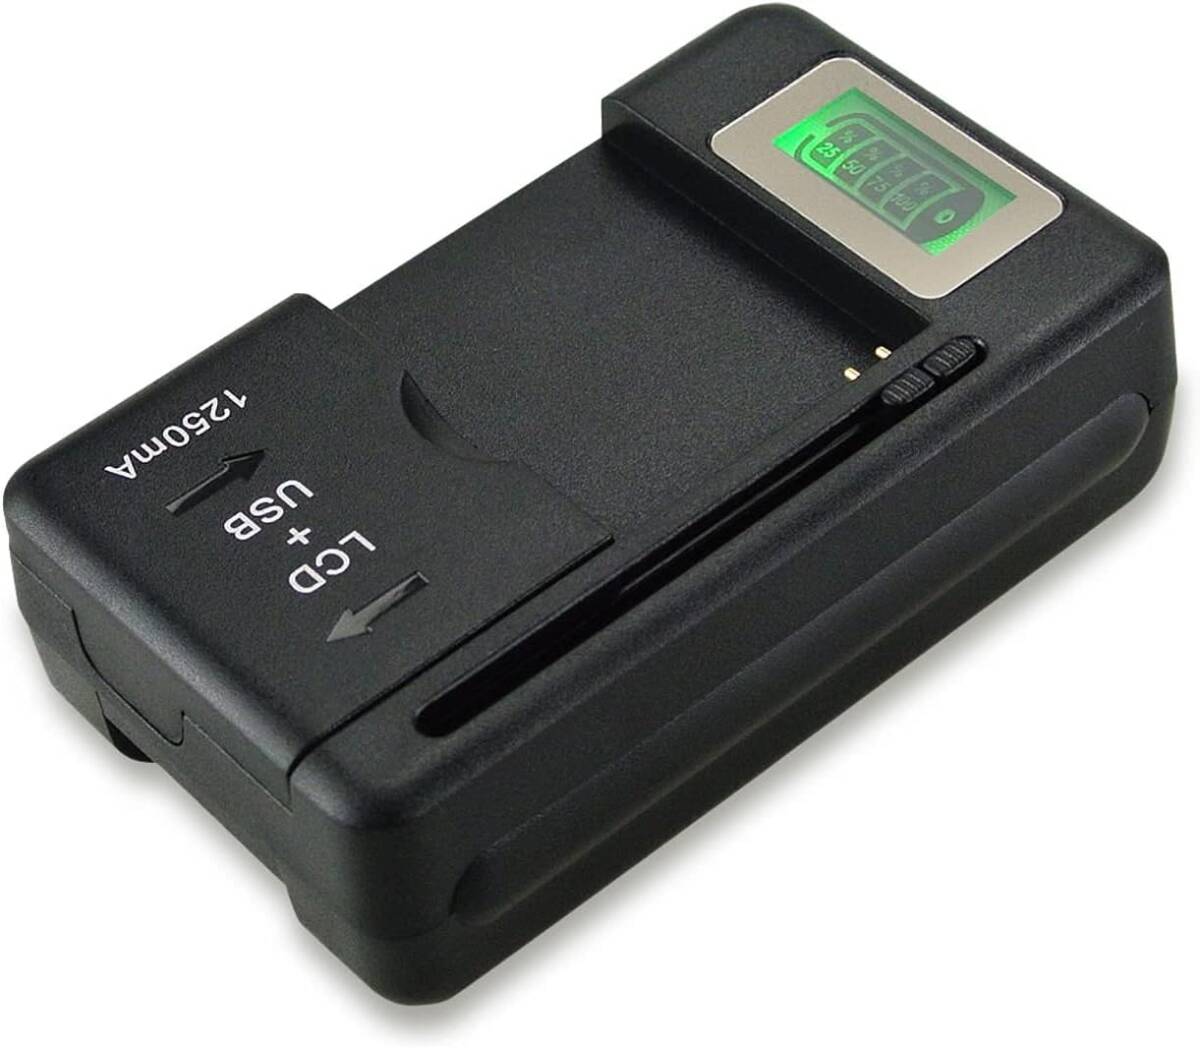 BQuel terminal sliding type multi battery charger S03* Galaxy s2 s3 s4ek superior digital camera for etc. LC